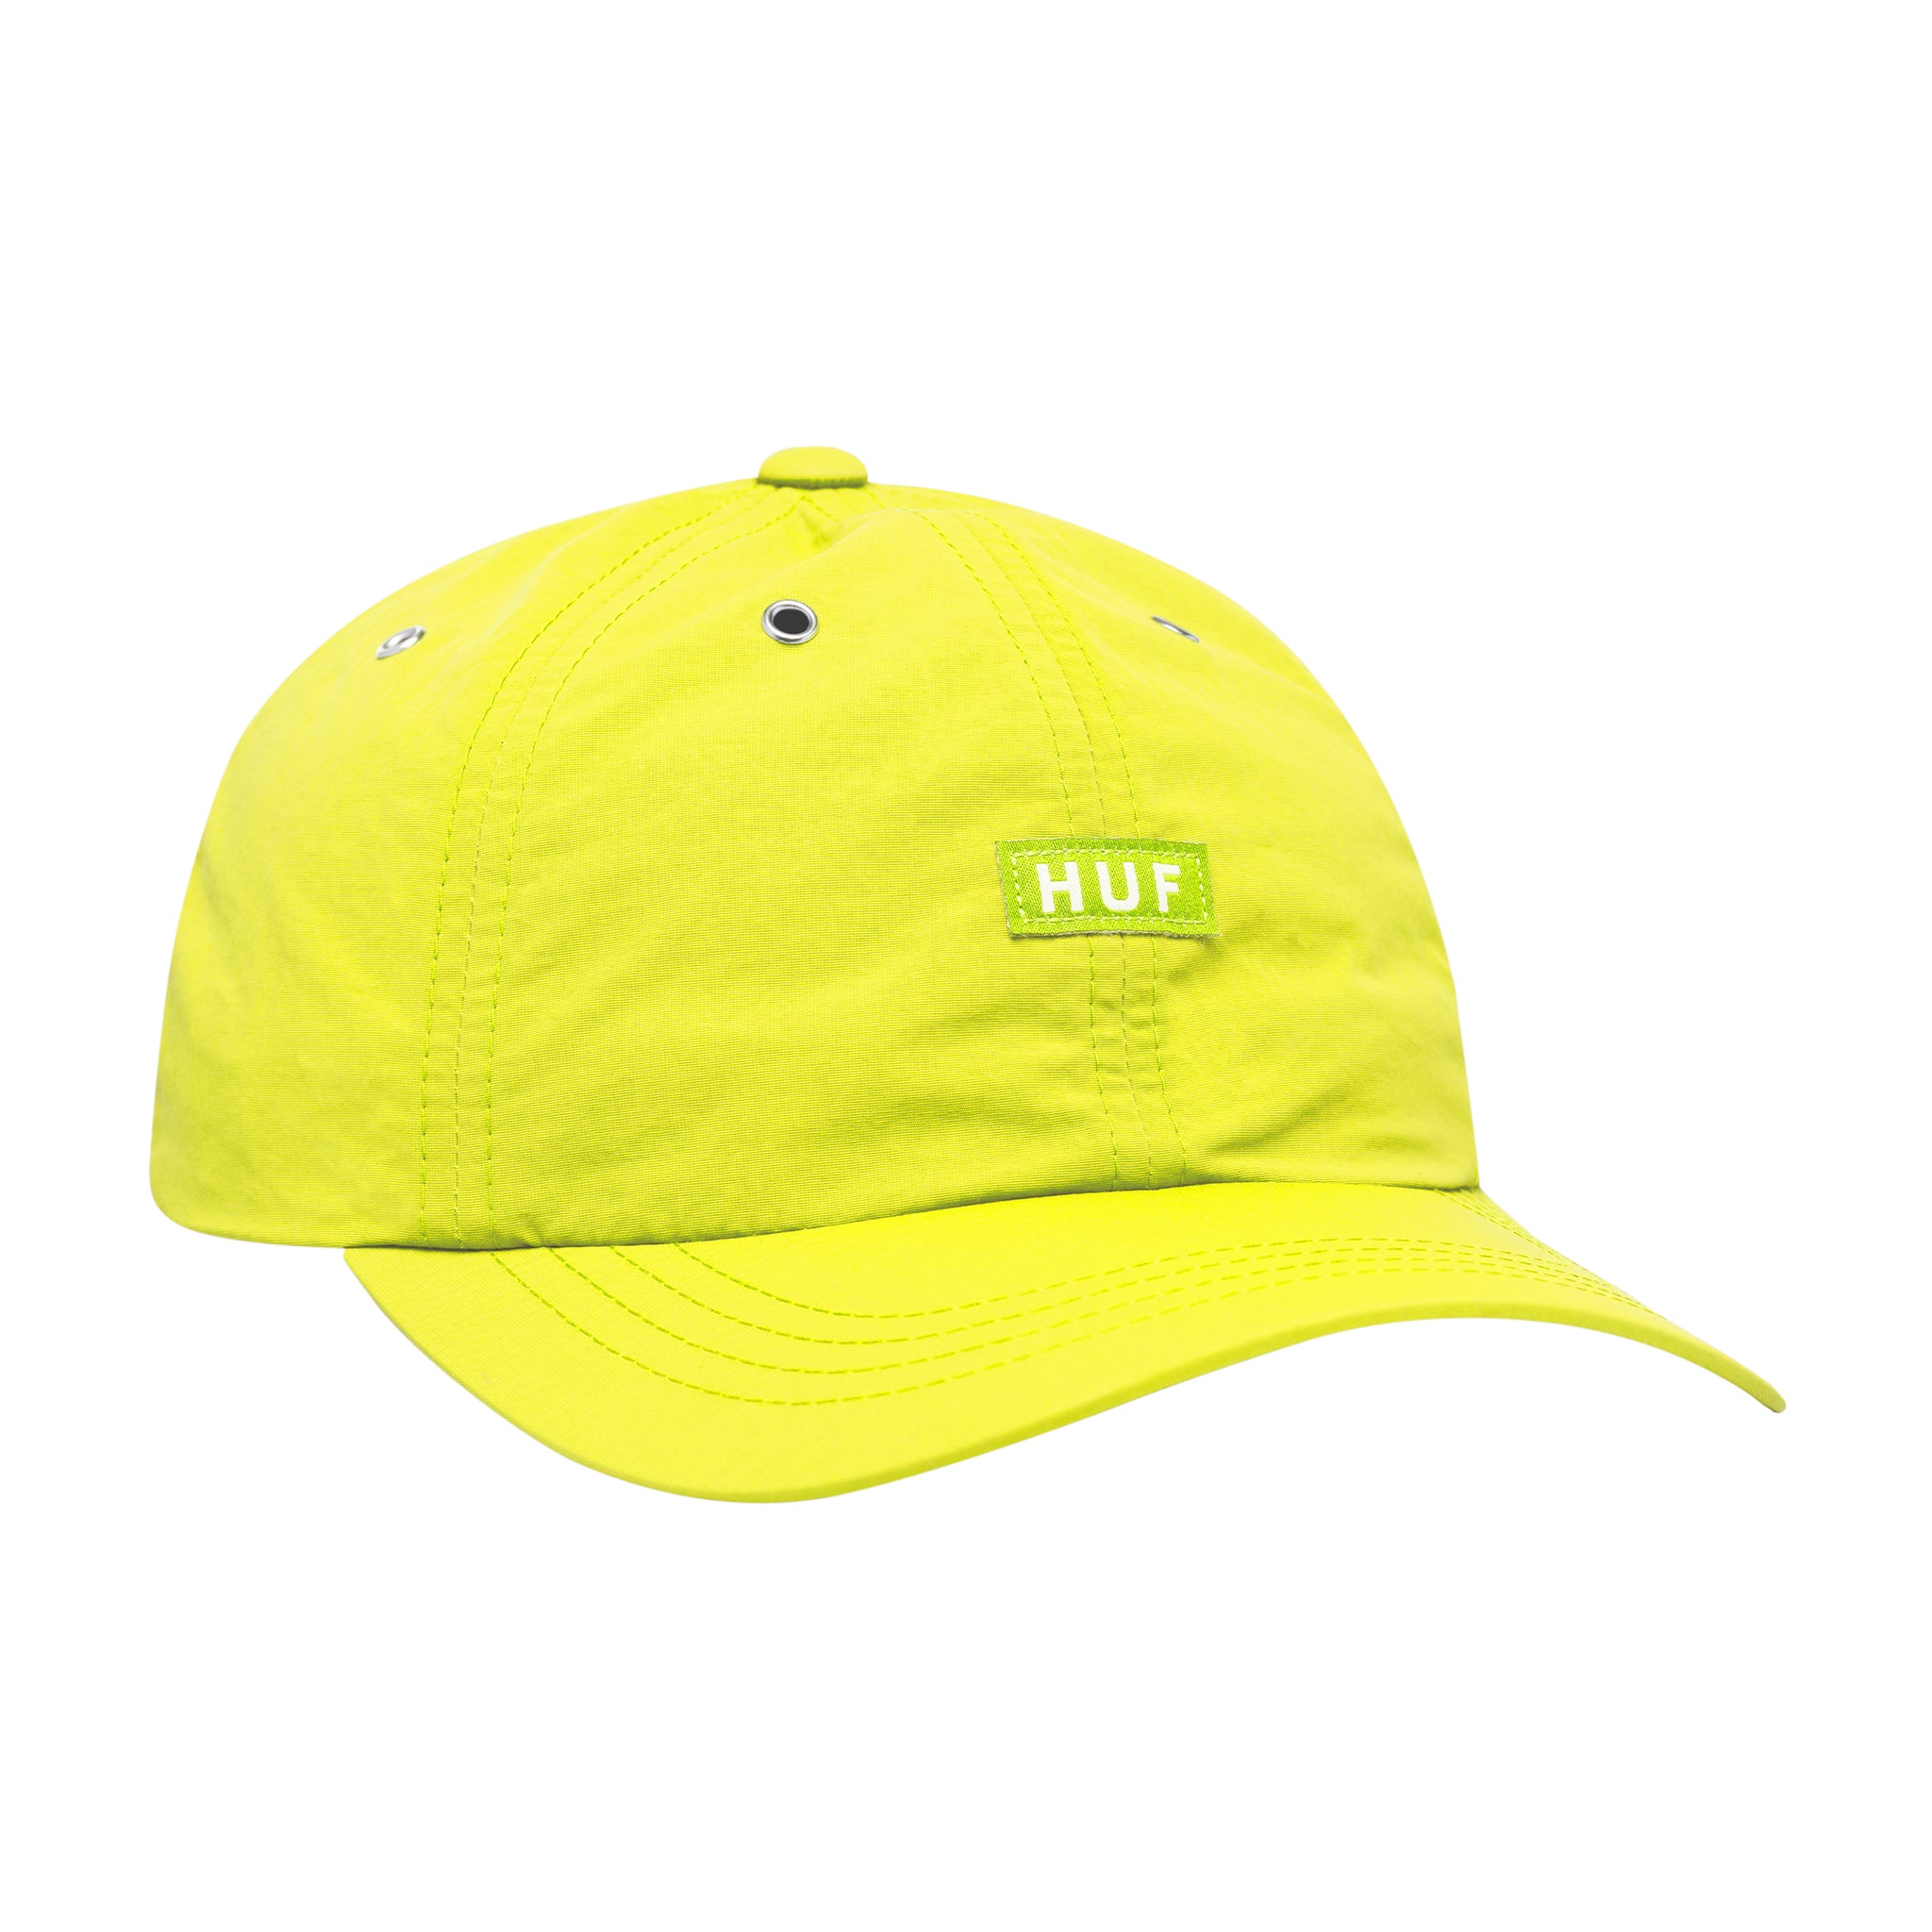 DWR Fuck It Curved Visor Cap - Hot Lime